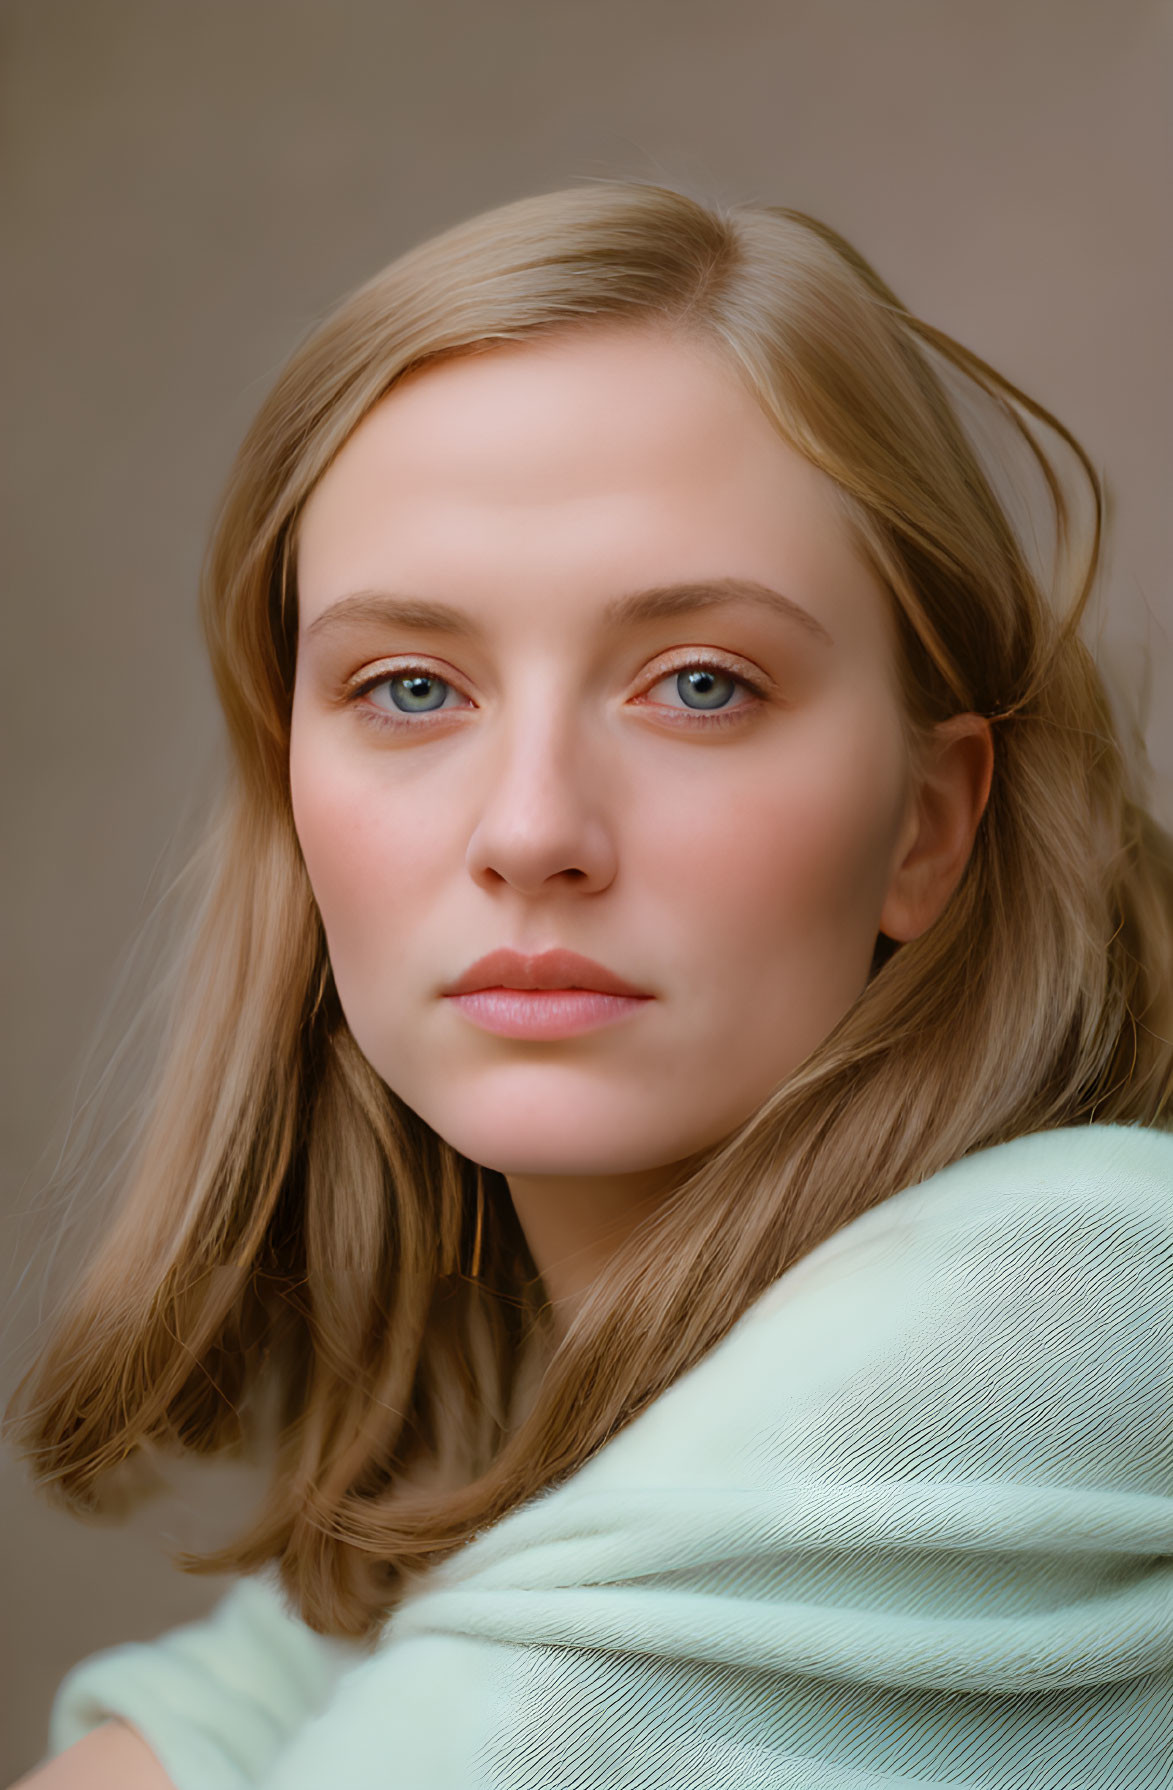 Blonde Woman Portrait with Blue Eyes and Serene Expression